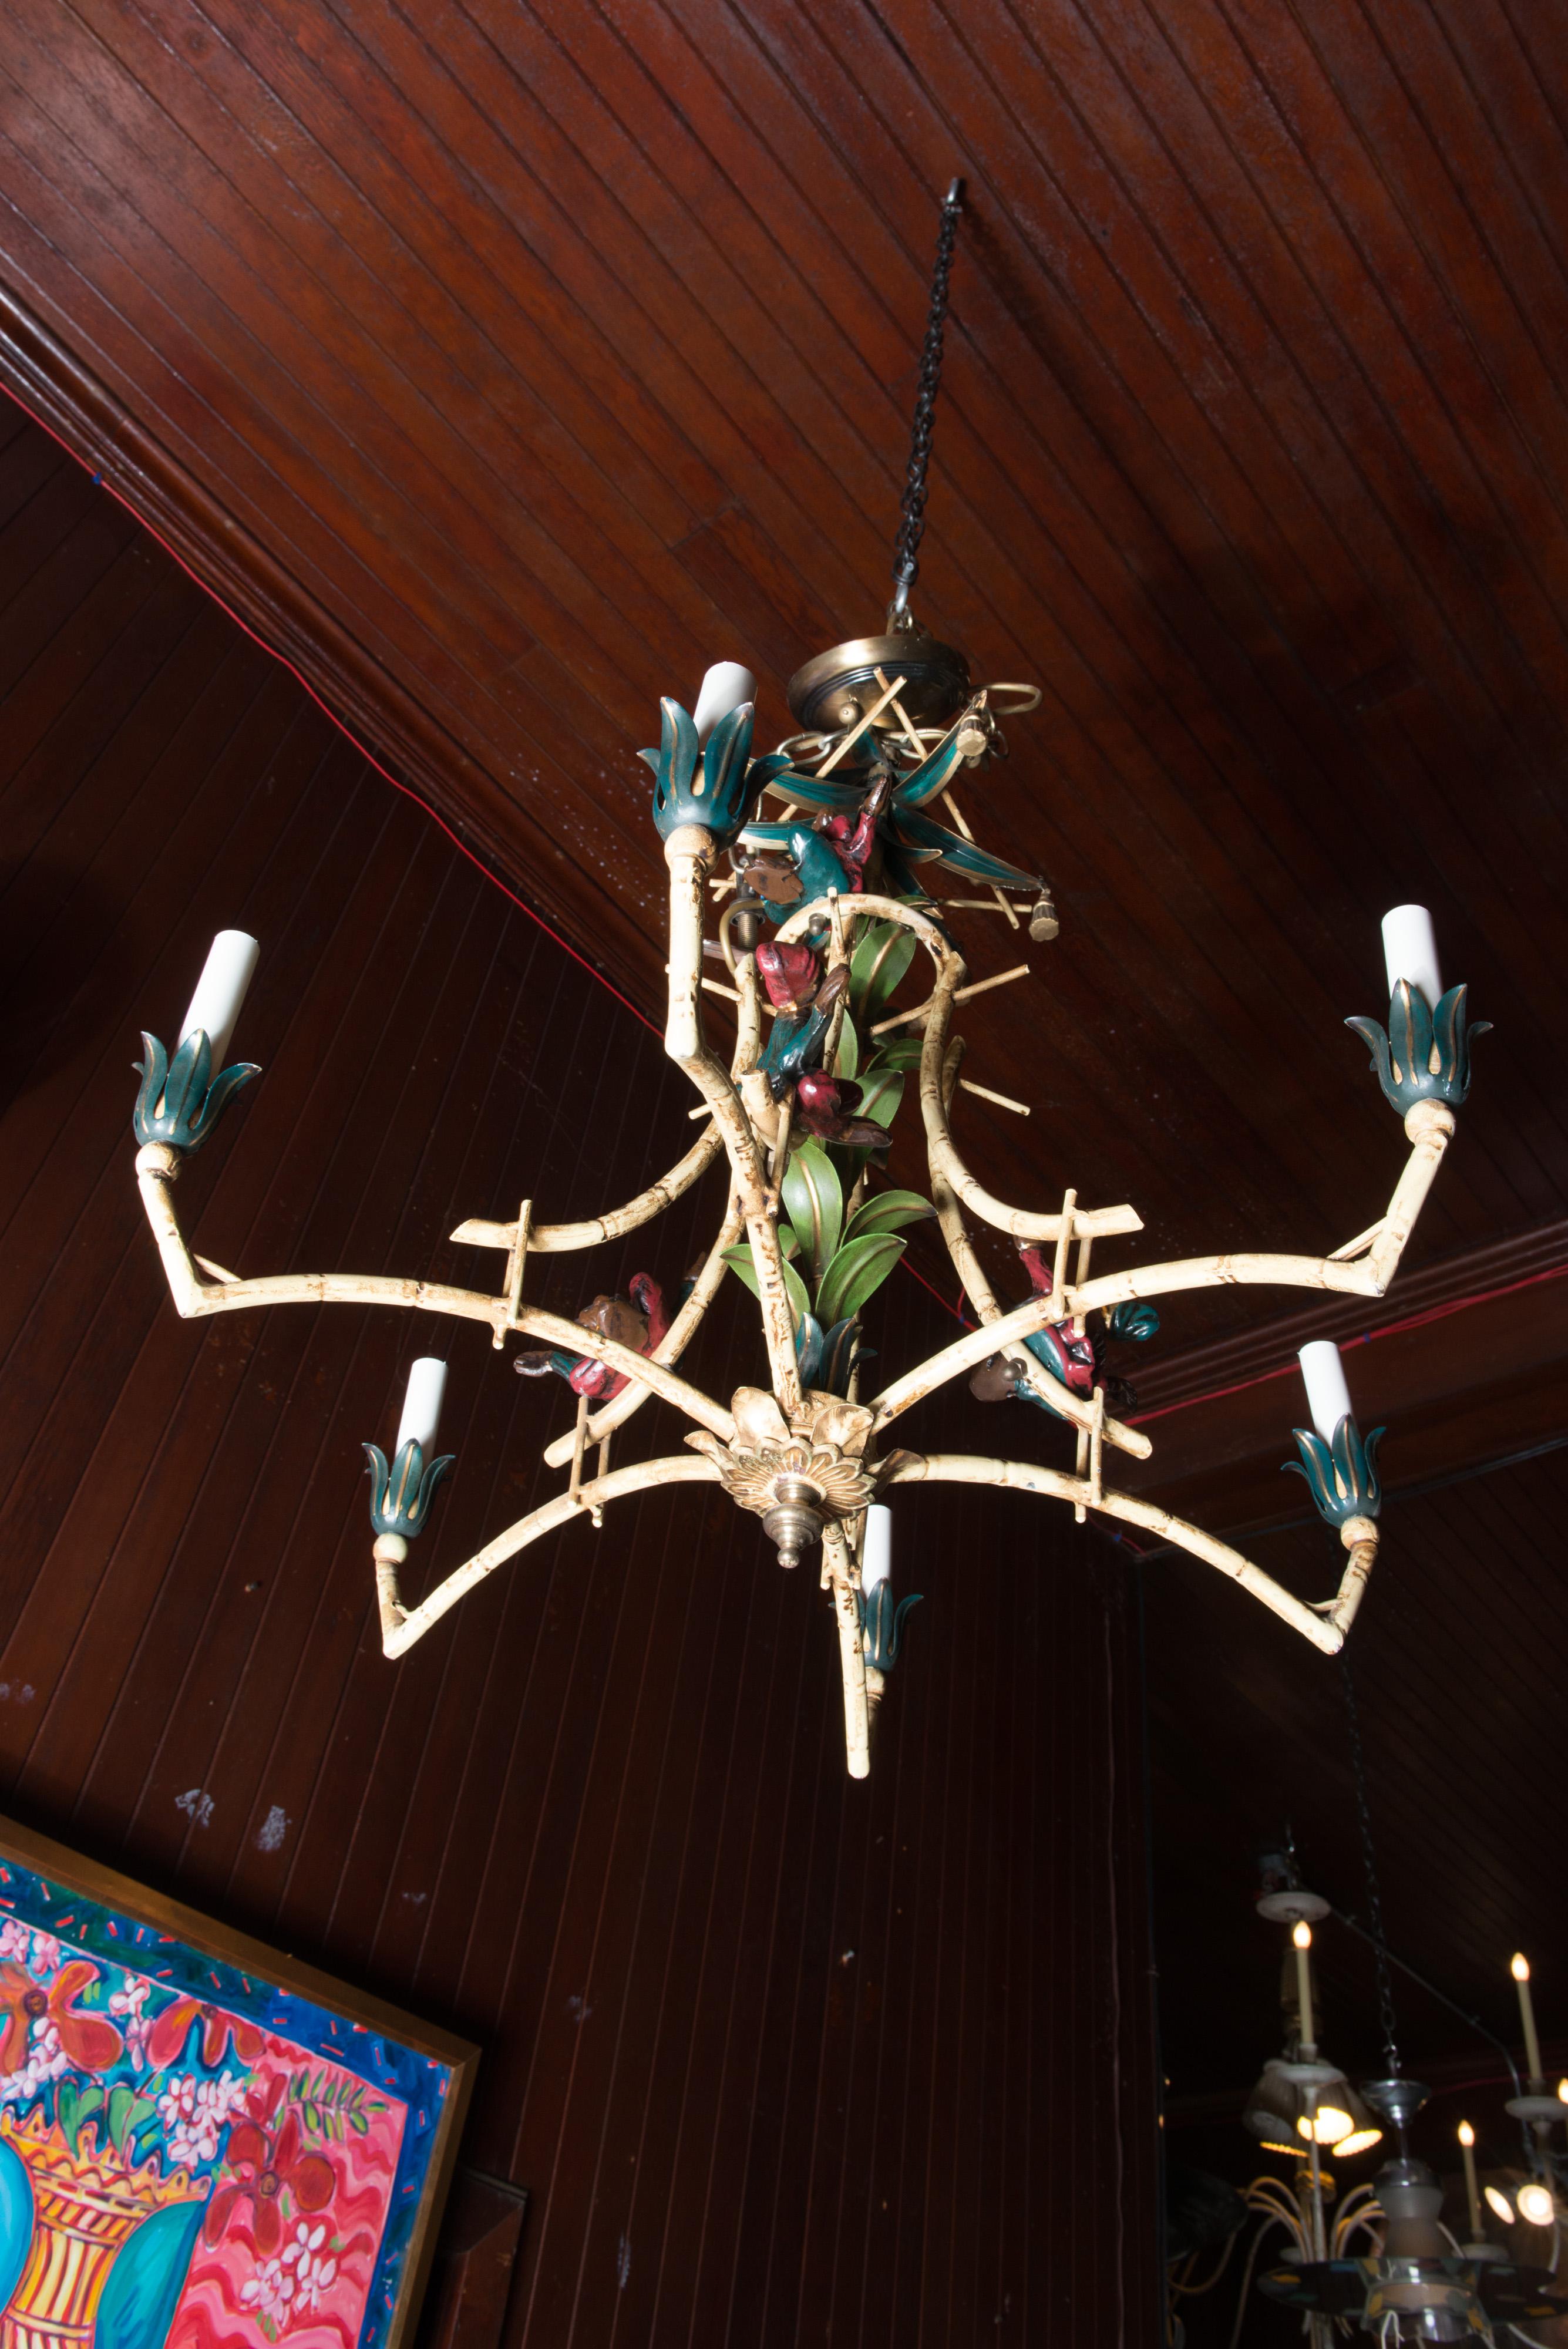 Painted iron Chinoiserie chandelier with decked out monkeys, tassels, and balls. Canopy and chain included.
Accommodates six chandelier bulbs.